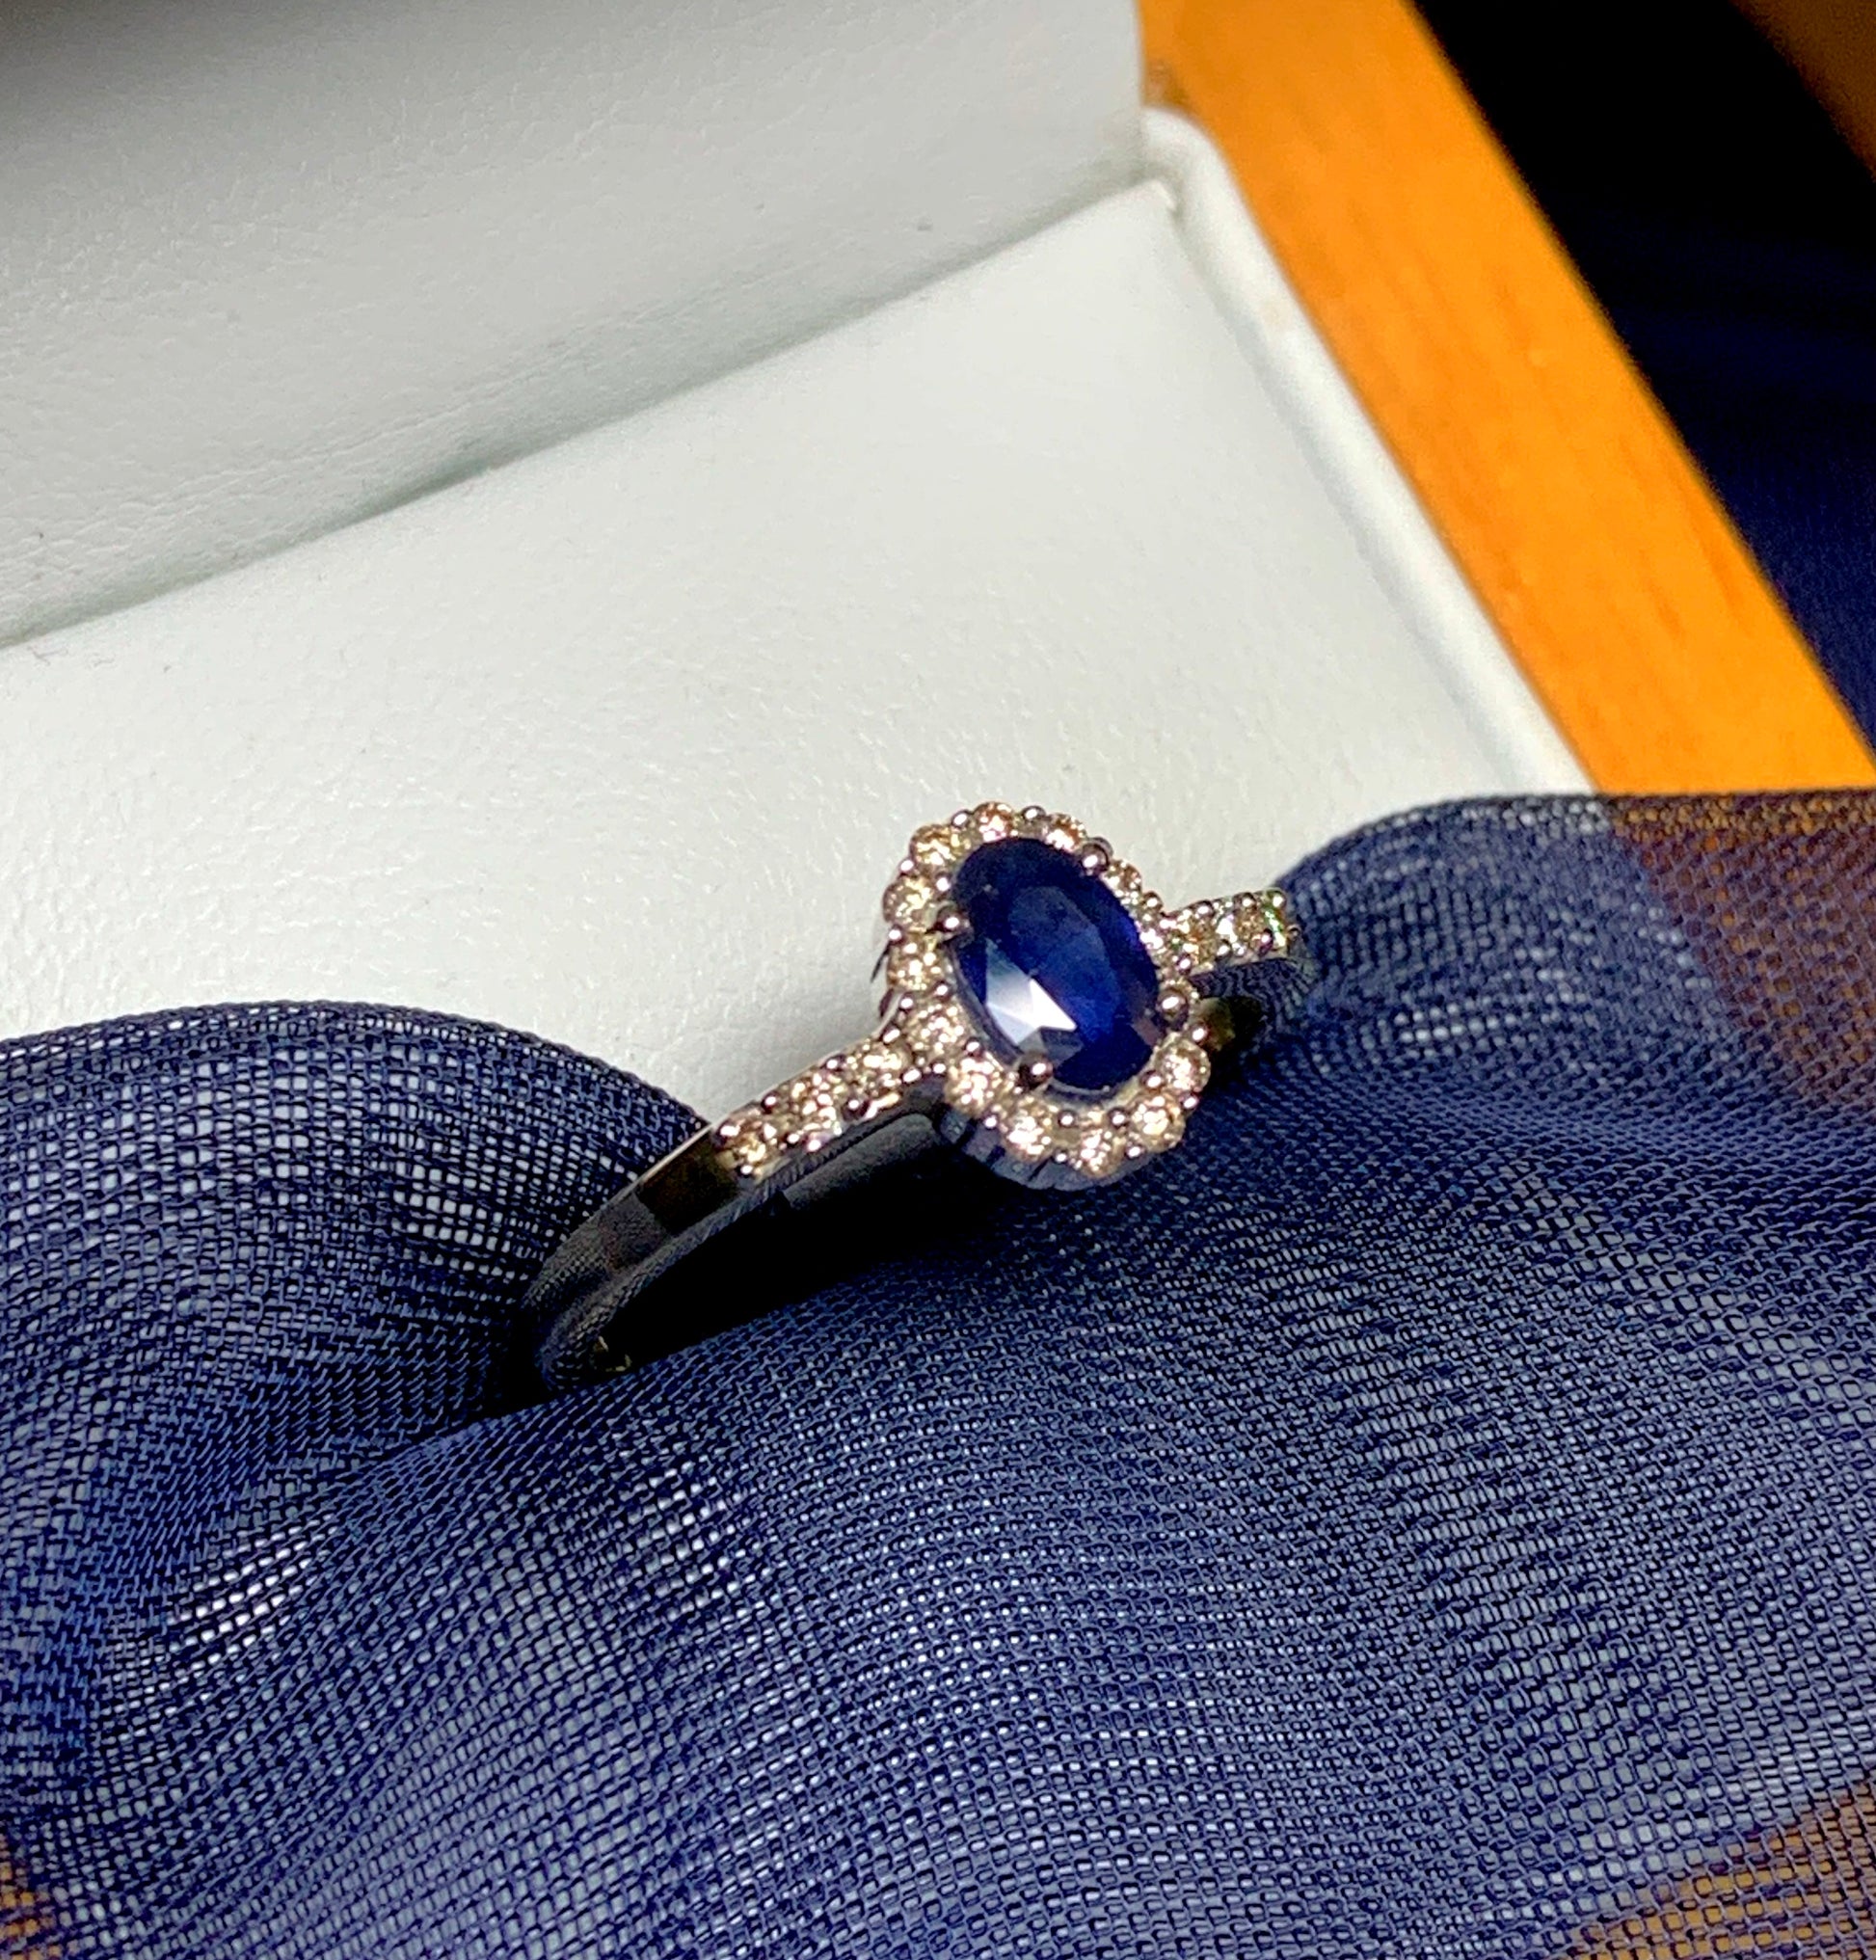 Dark blue sapphire diamond yellow gold oval cluster ring with diamond set shoulders